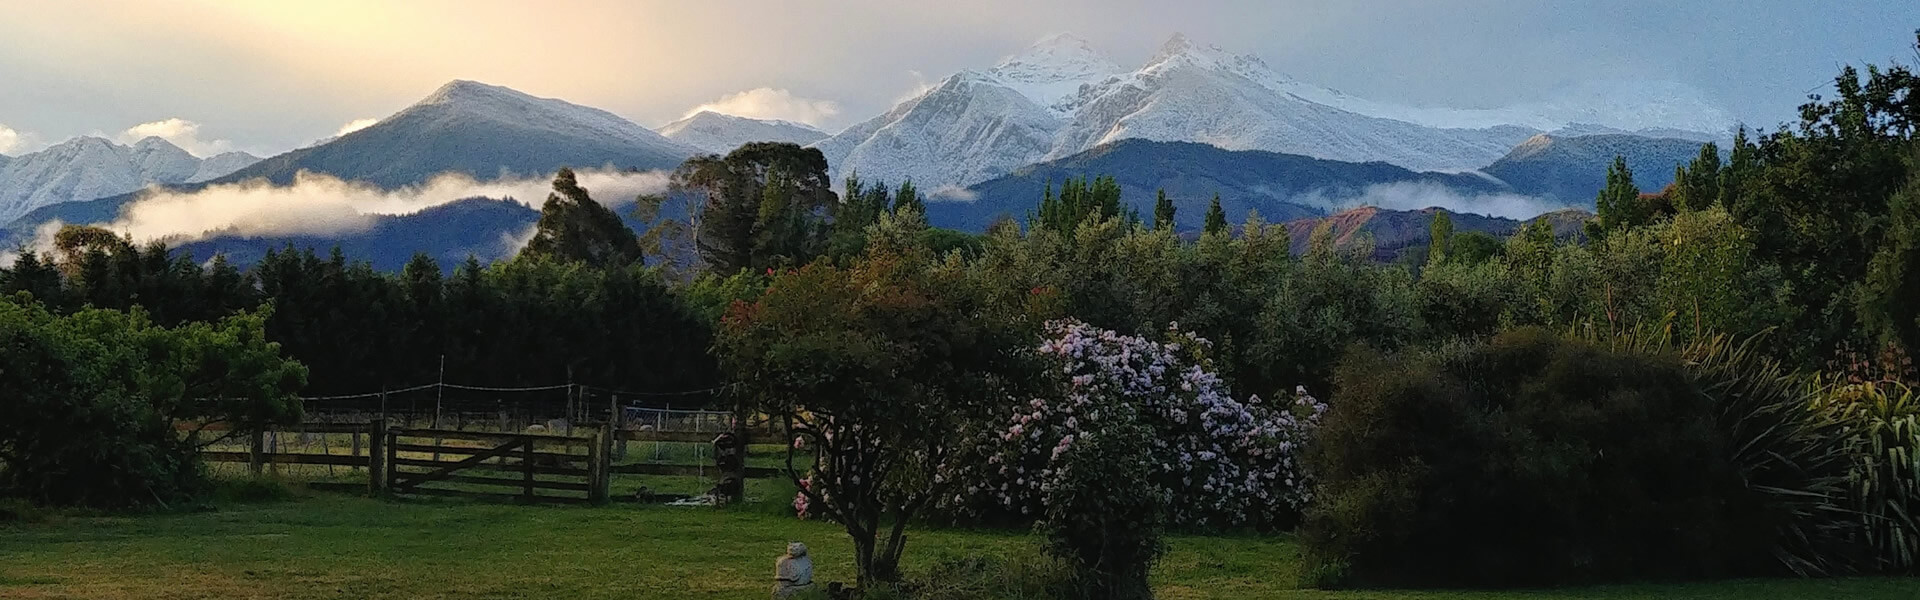 View Of Garden And Mountains Near Jeymar Soap And Body In Blenheim Marlborough NZ